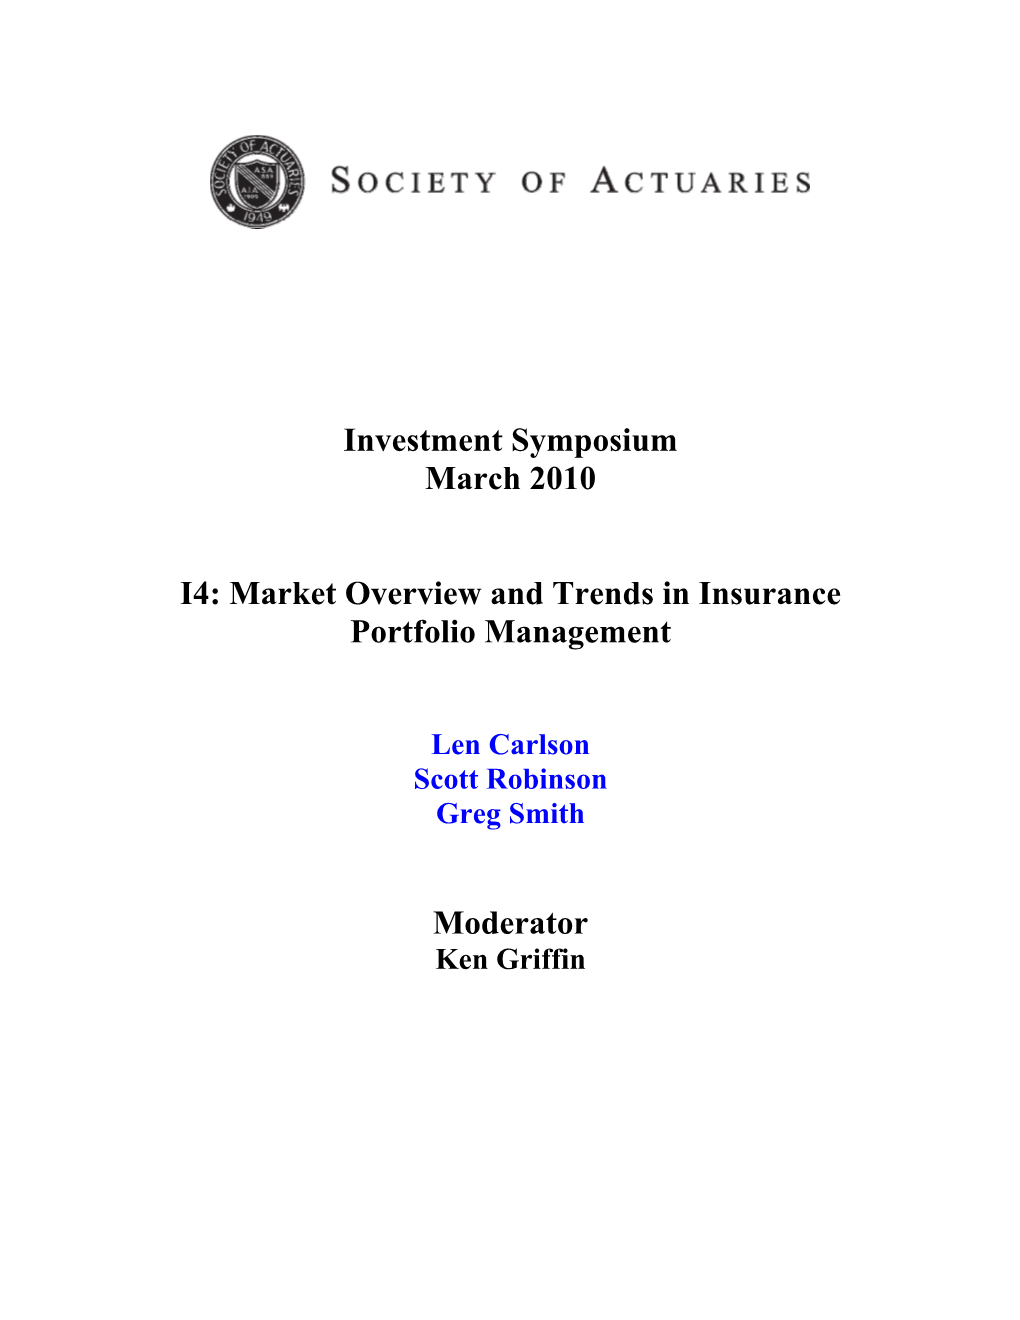 Overview and Trends in Insurance Portfolio Management